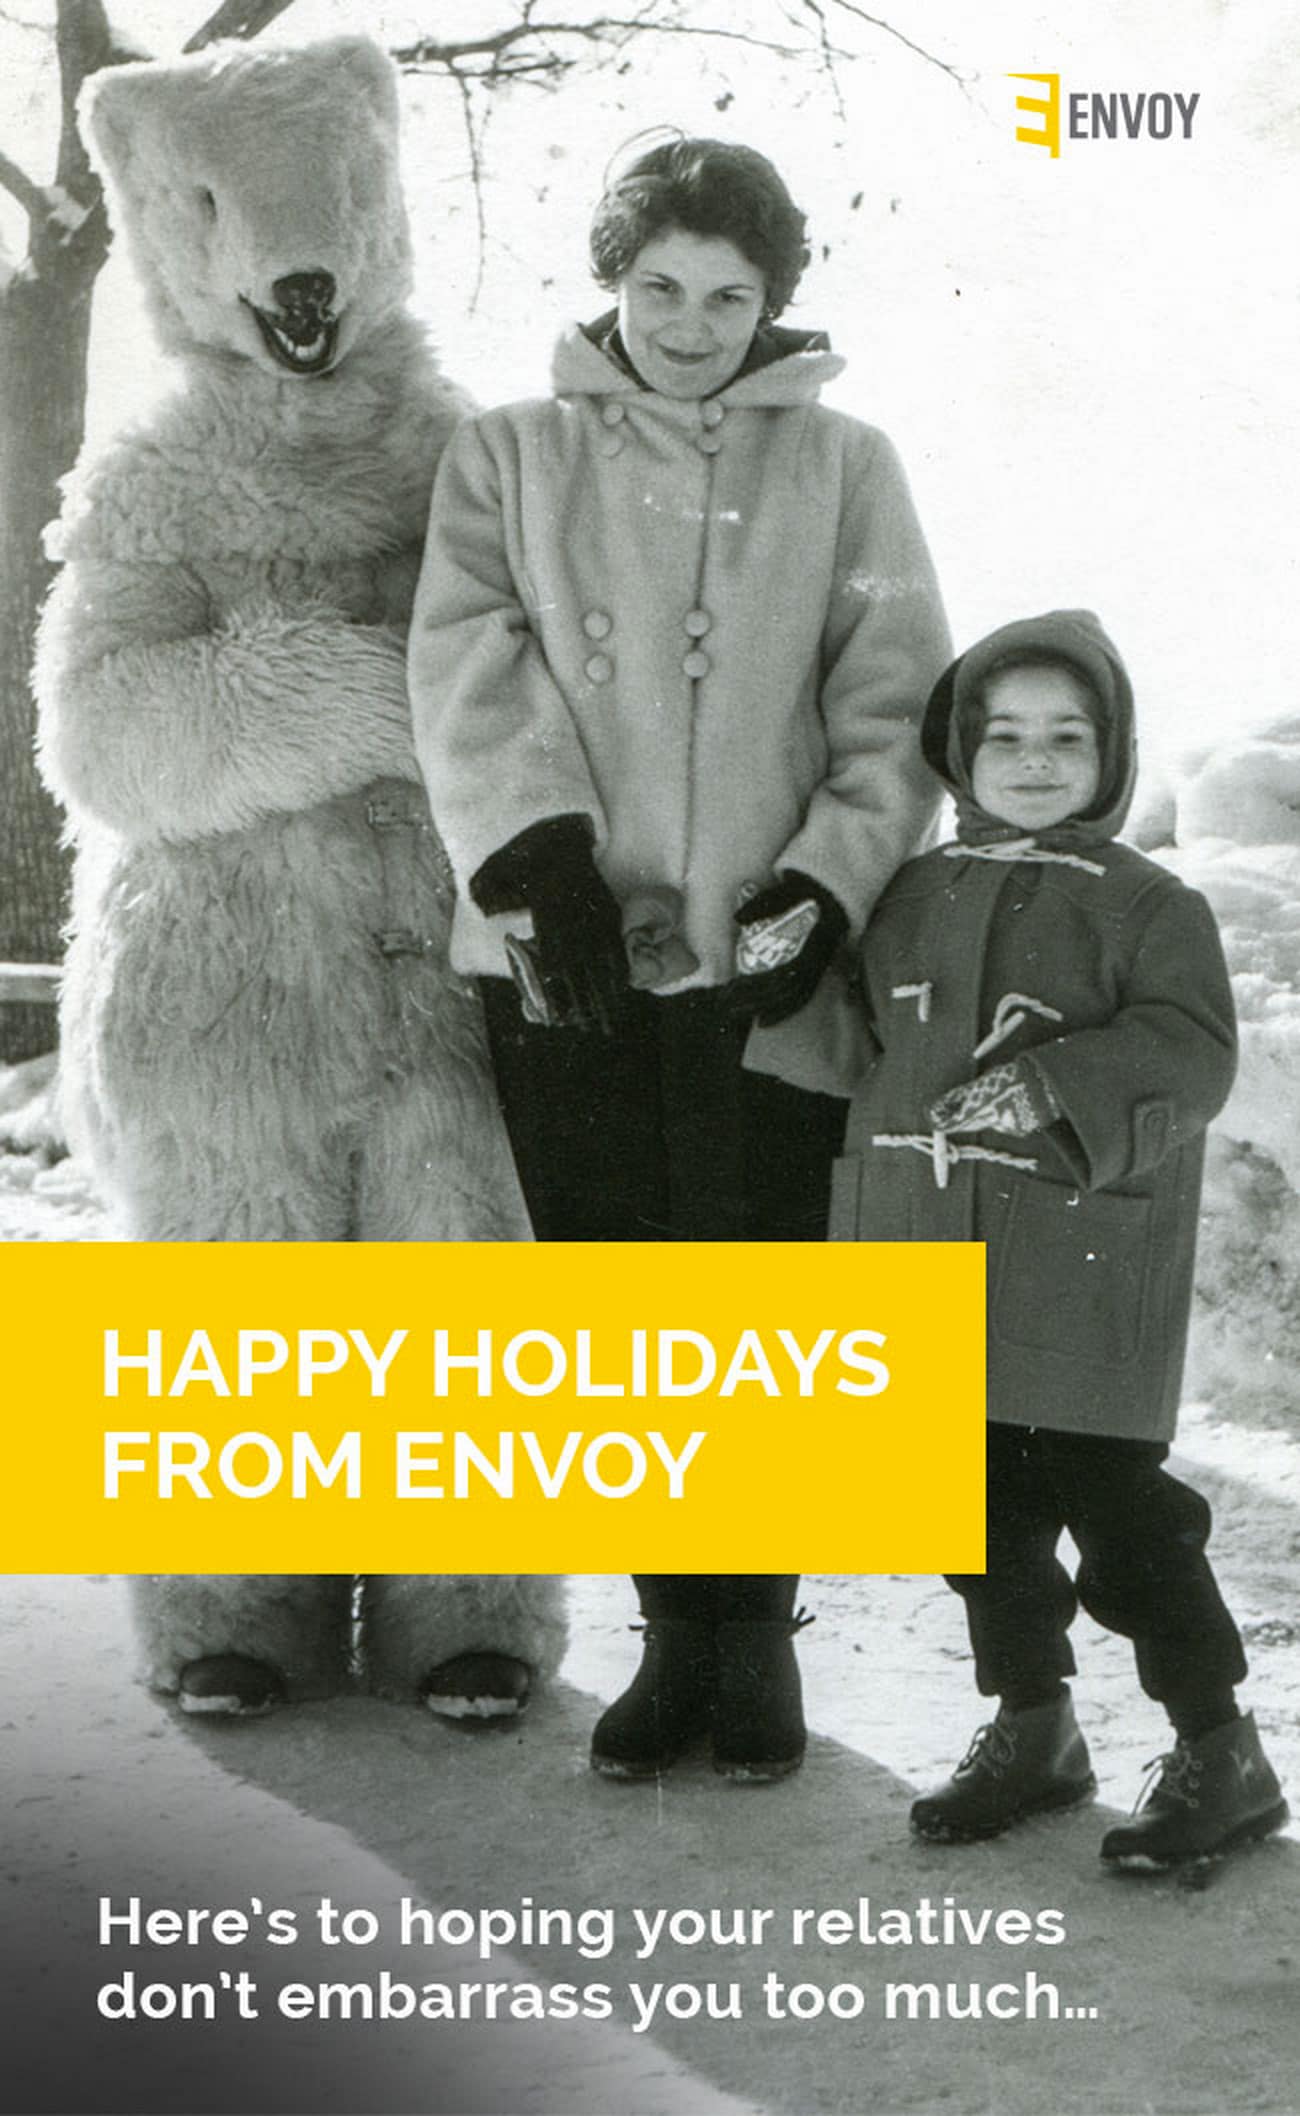 Email marketing holiday mailer written and designed for Envoy Relationship Marketing, showing a person dressed up as a polar bear with a woman and boy, reading "Happy Holidays from Envoy - Here's to hoping your relatives don't embarrass you too much..."